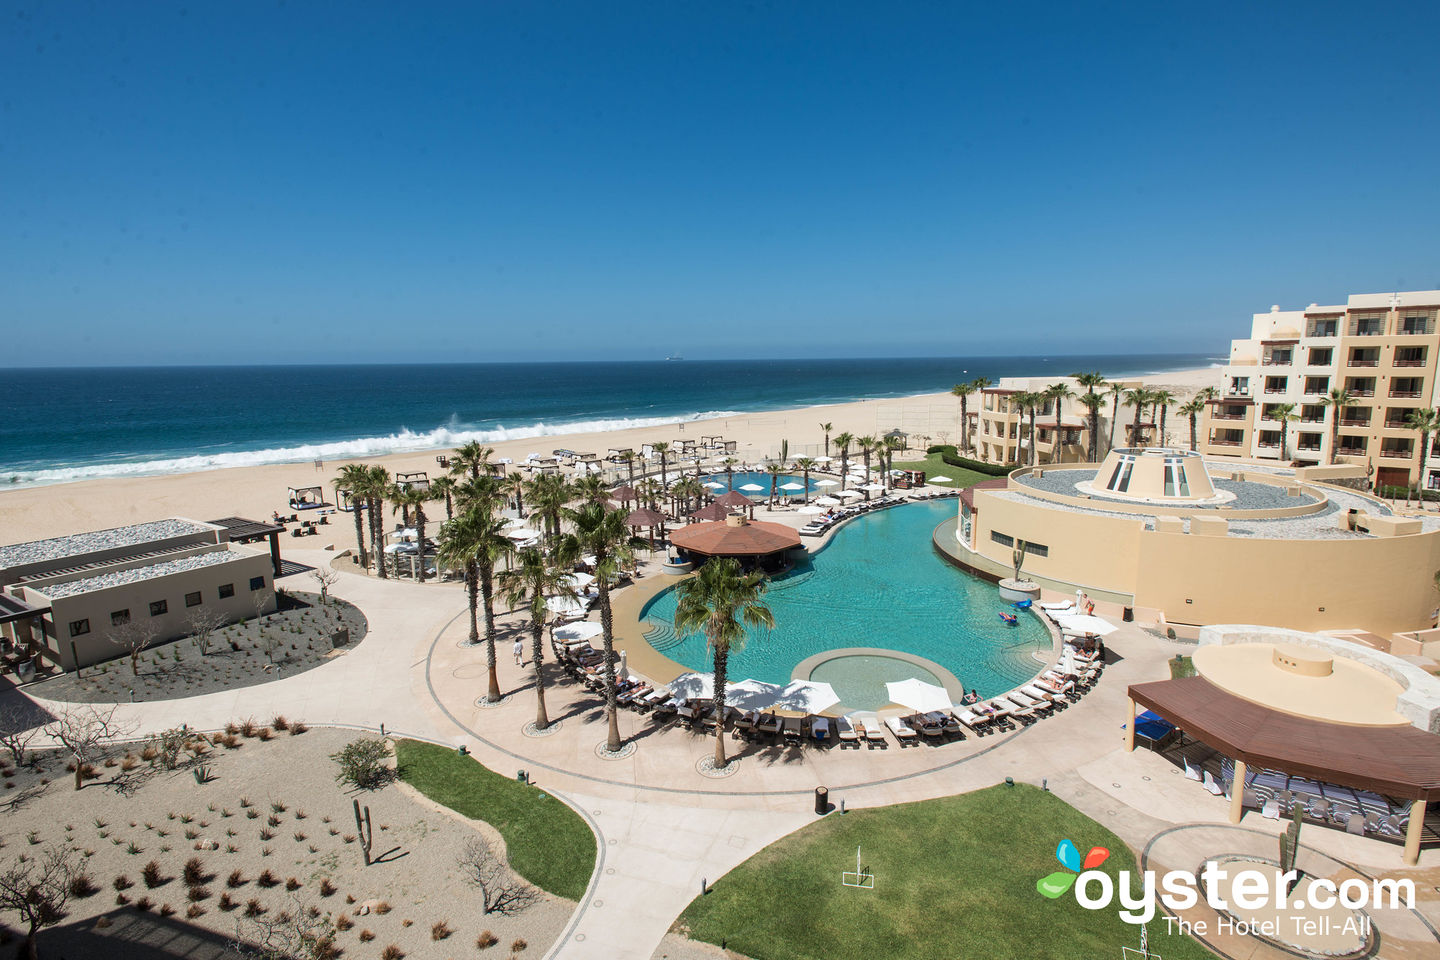 Pueblo Bonito Pacifica Golf Spa Resort Review What To Really Expect If You Stay